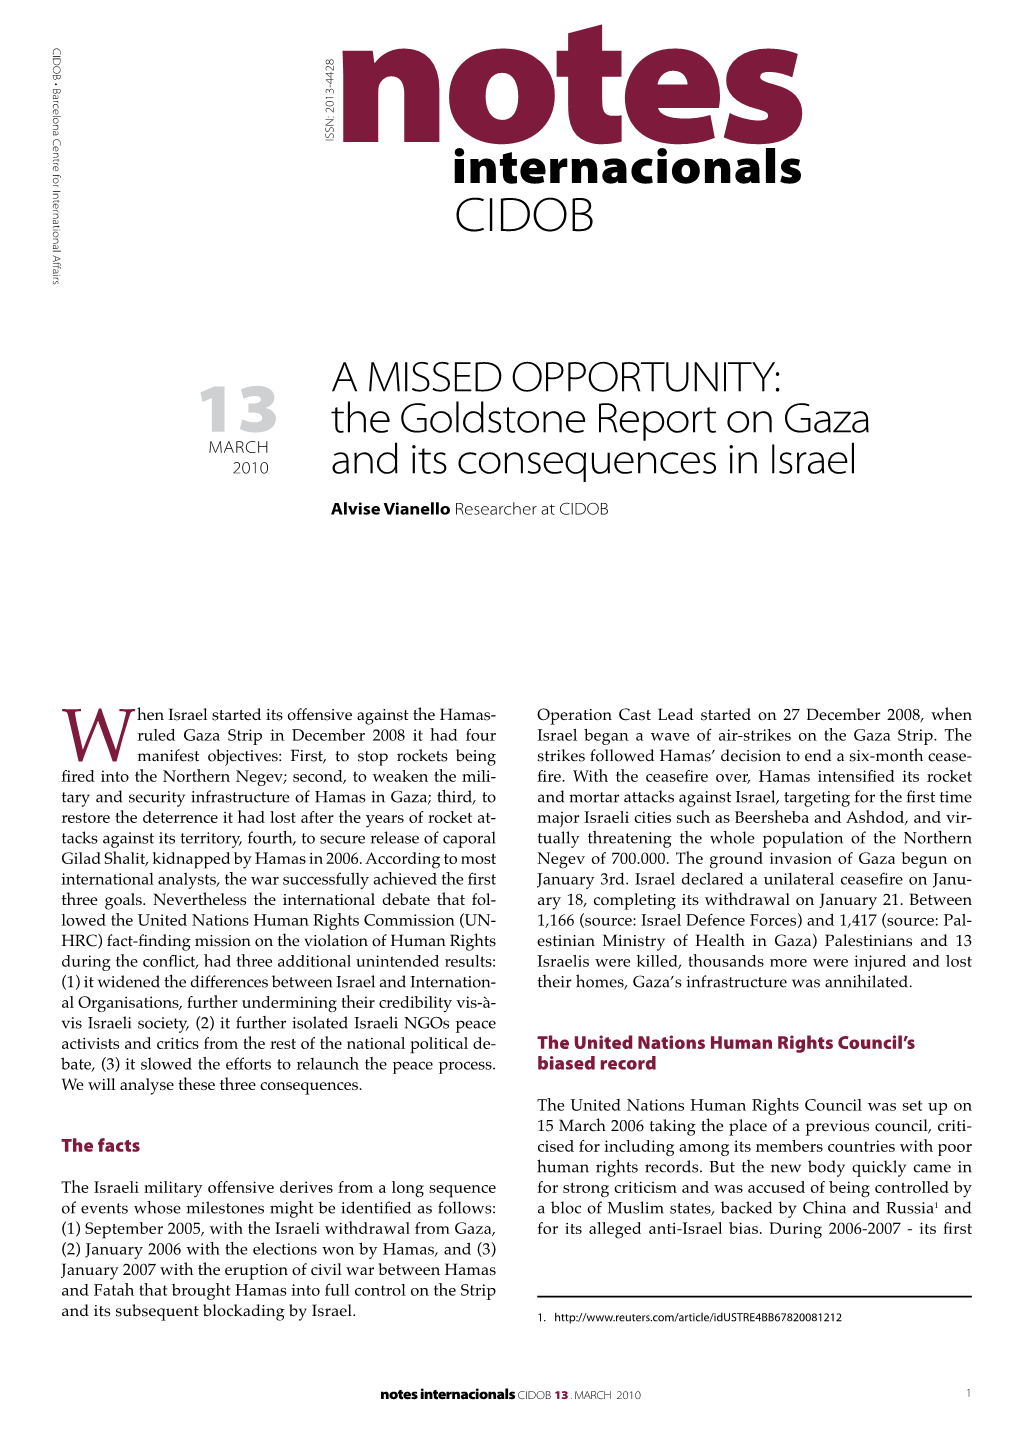 The Goldstone Report on Gaza and Its Consequences in Israel